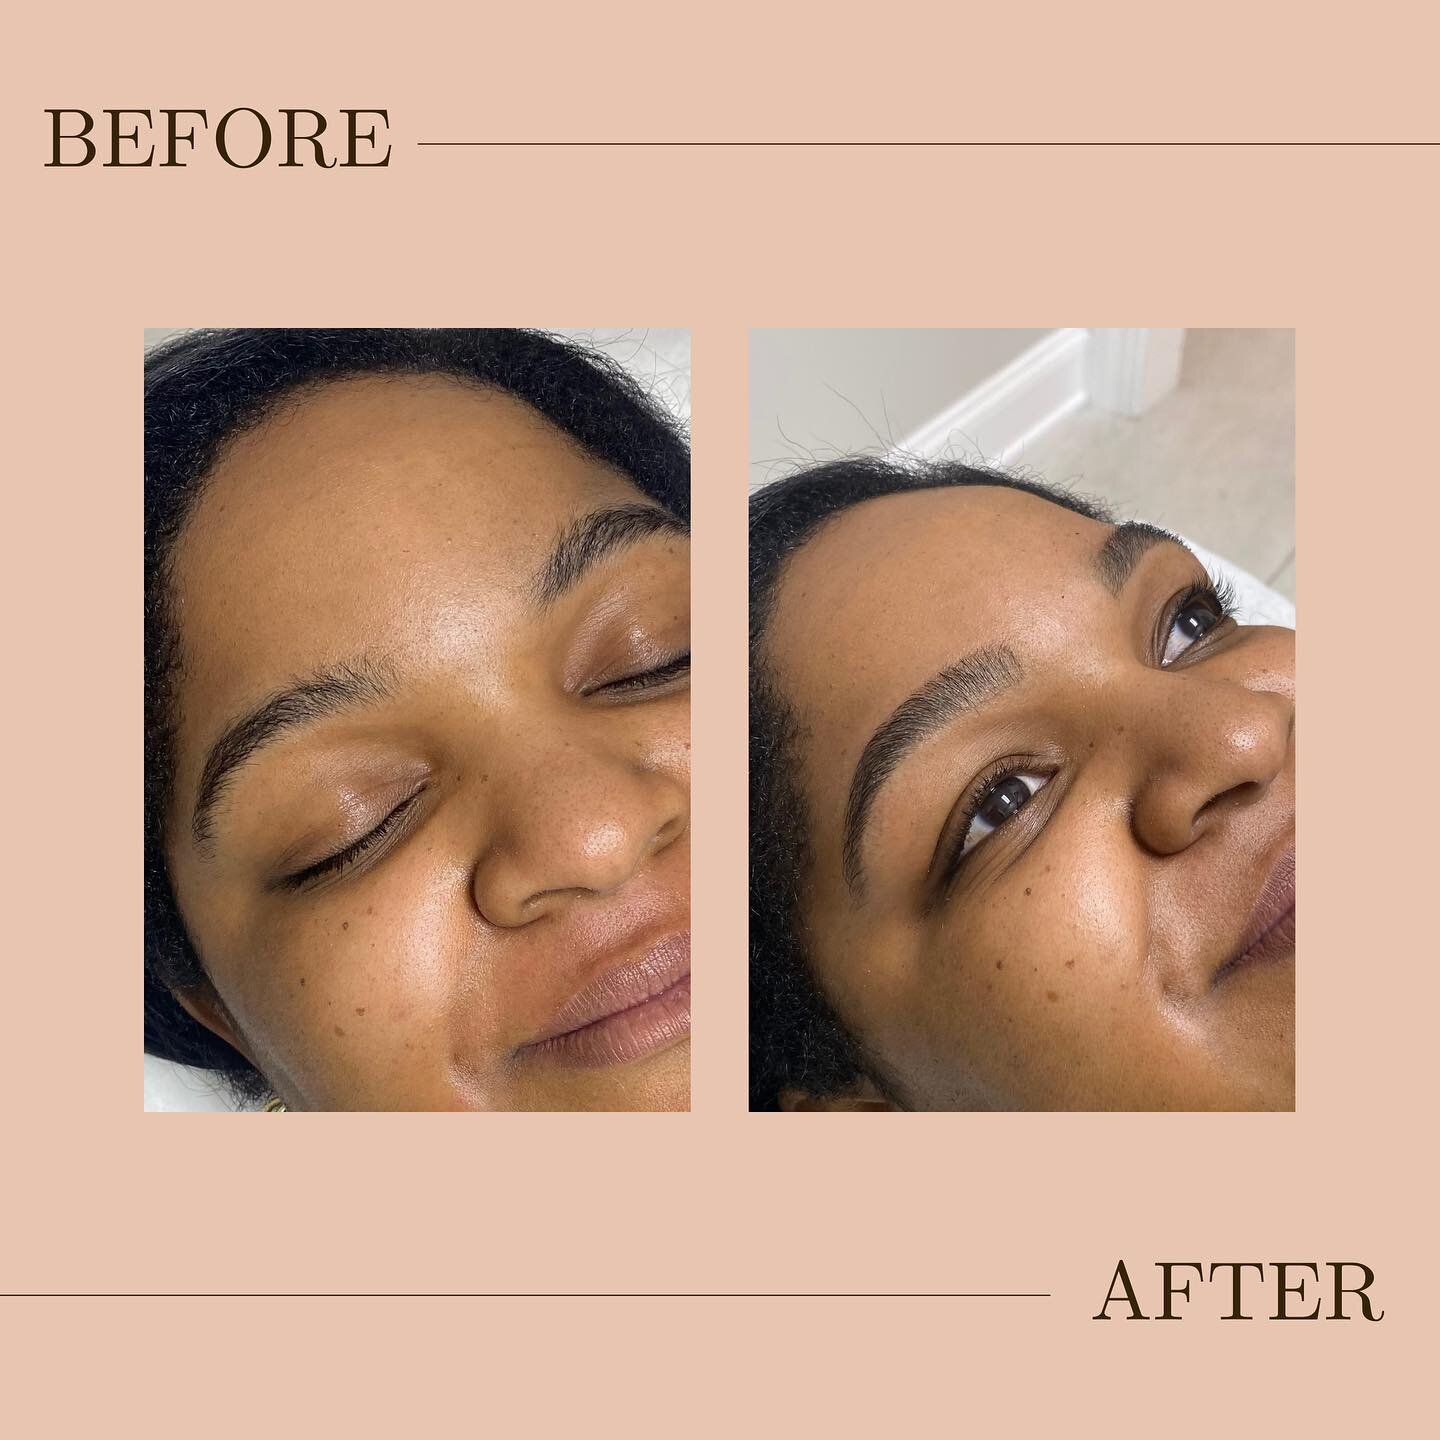 Before &amp; After! Good brows = Good vibes ✨

Book your brow waxing service through the link in our bio. 

#chicagowaxing #chicagogoldcoast #chicagoeyebrows #chicagobeauty #chicagoesthetician #beforeandafterbrows #chicagosalon #goldcoastchicago #chi